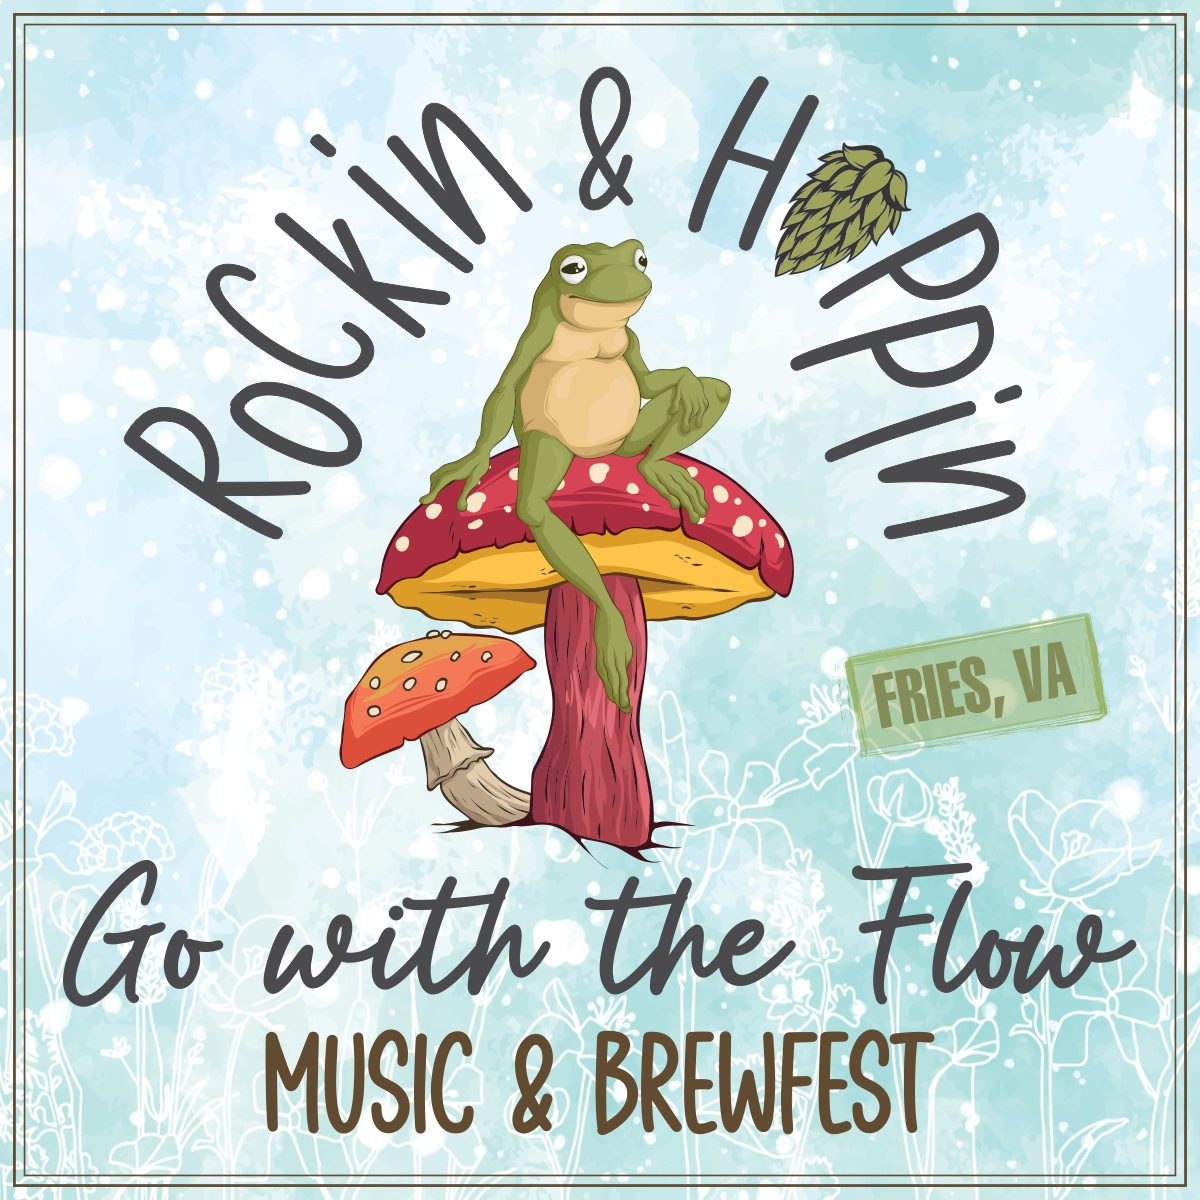 5th Annual Go with the Flow Music & Brewfest on the New River in Fries, VA